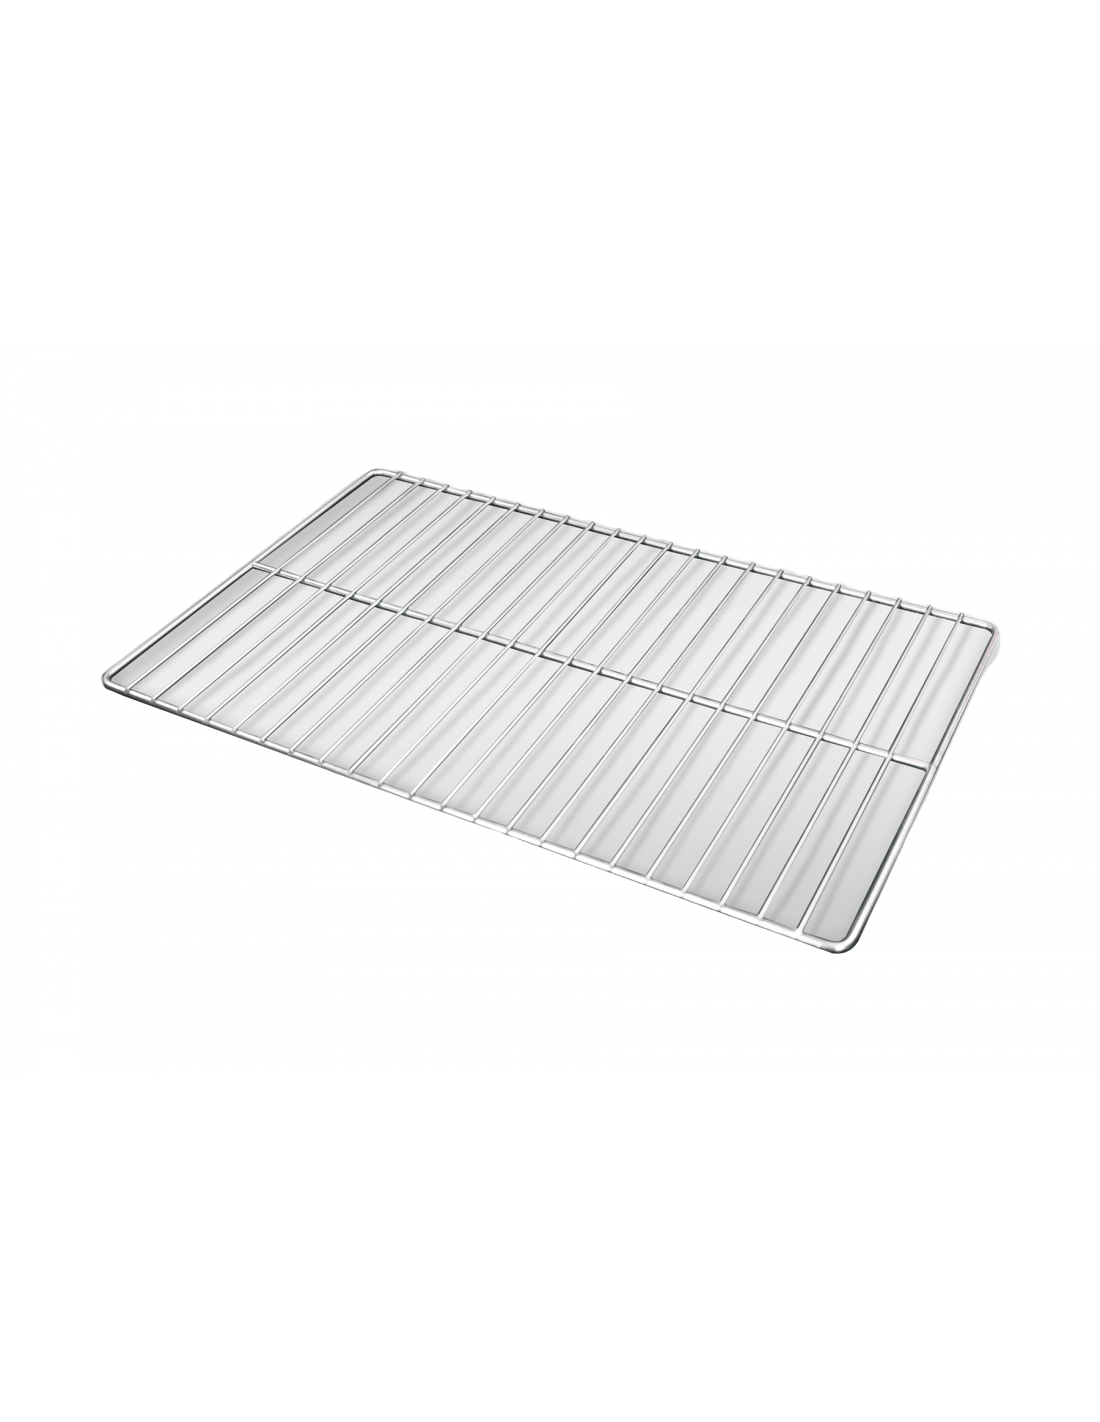 GN 2/1 stainless steel grill